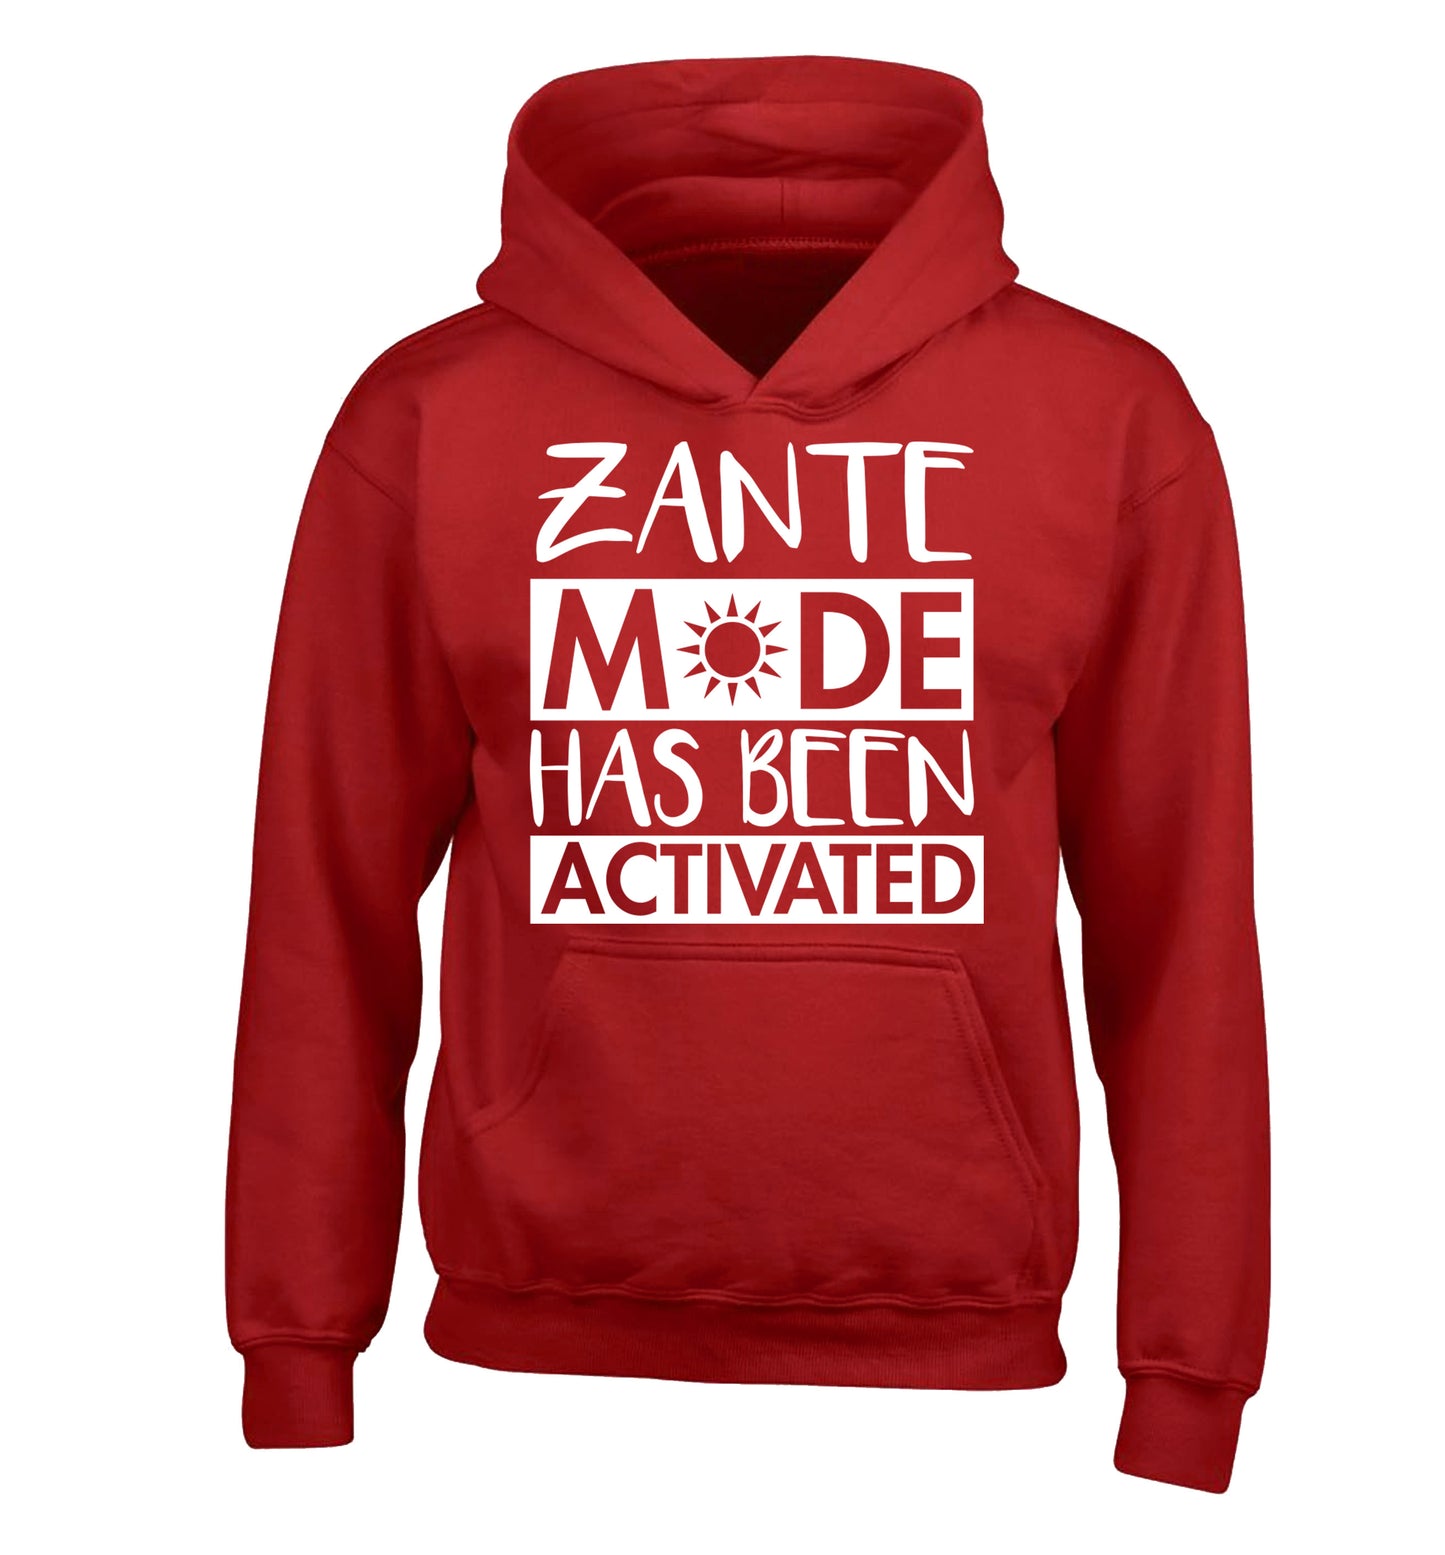 Zante mode has been activated children's red hoodie 12-13 Years